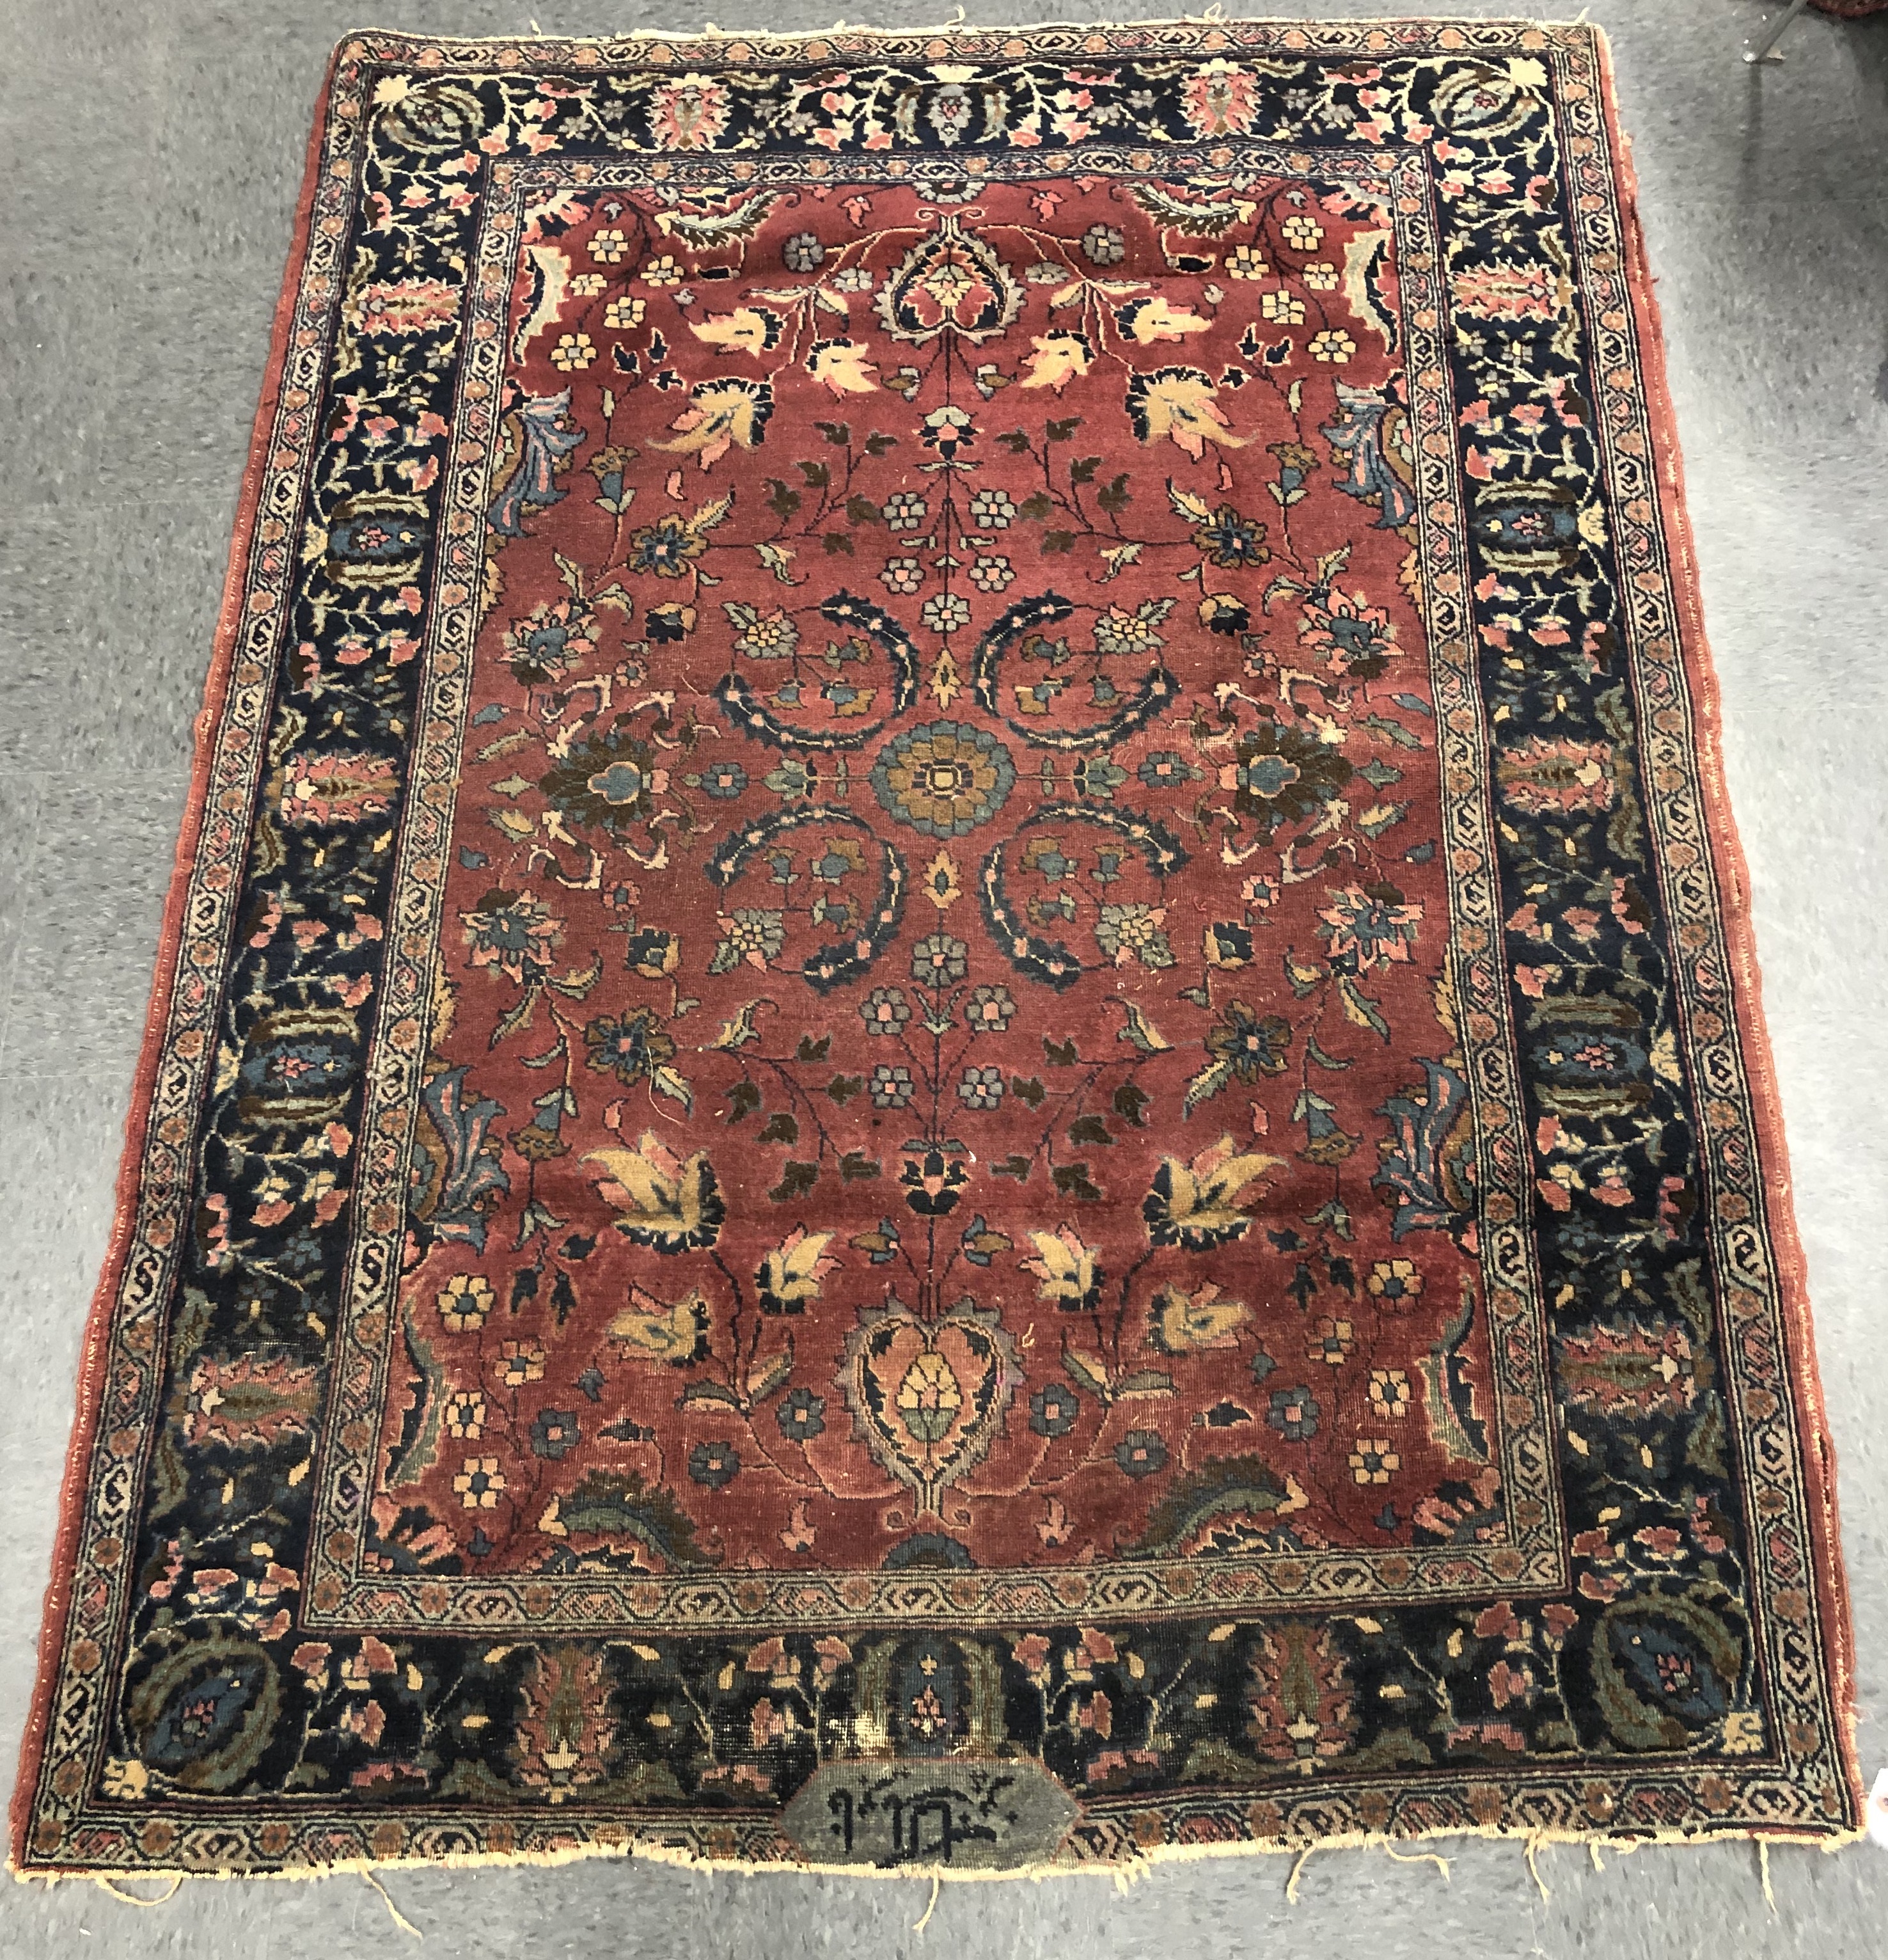 SIGNED PERSIAN FLORAL RUG, 6' 1"